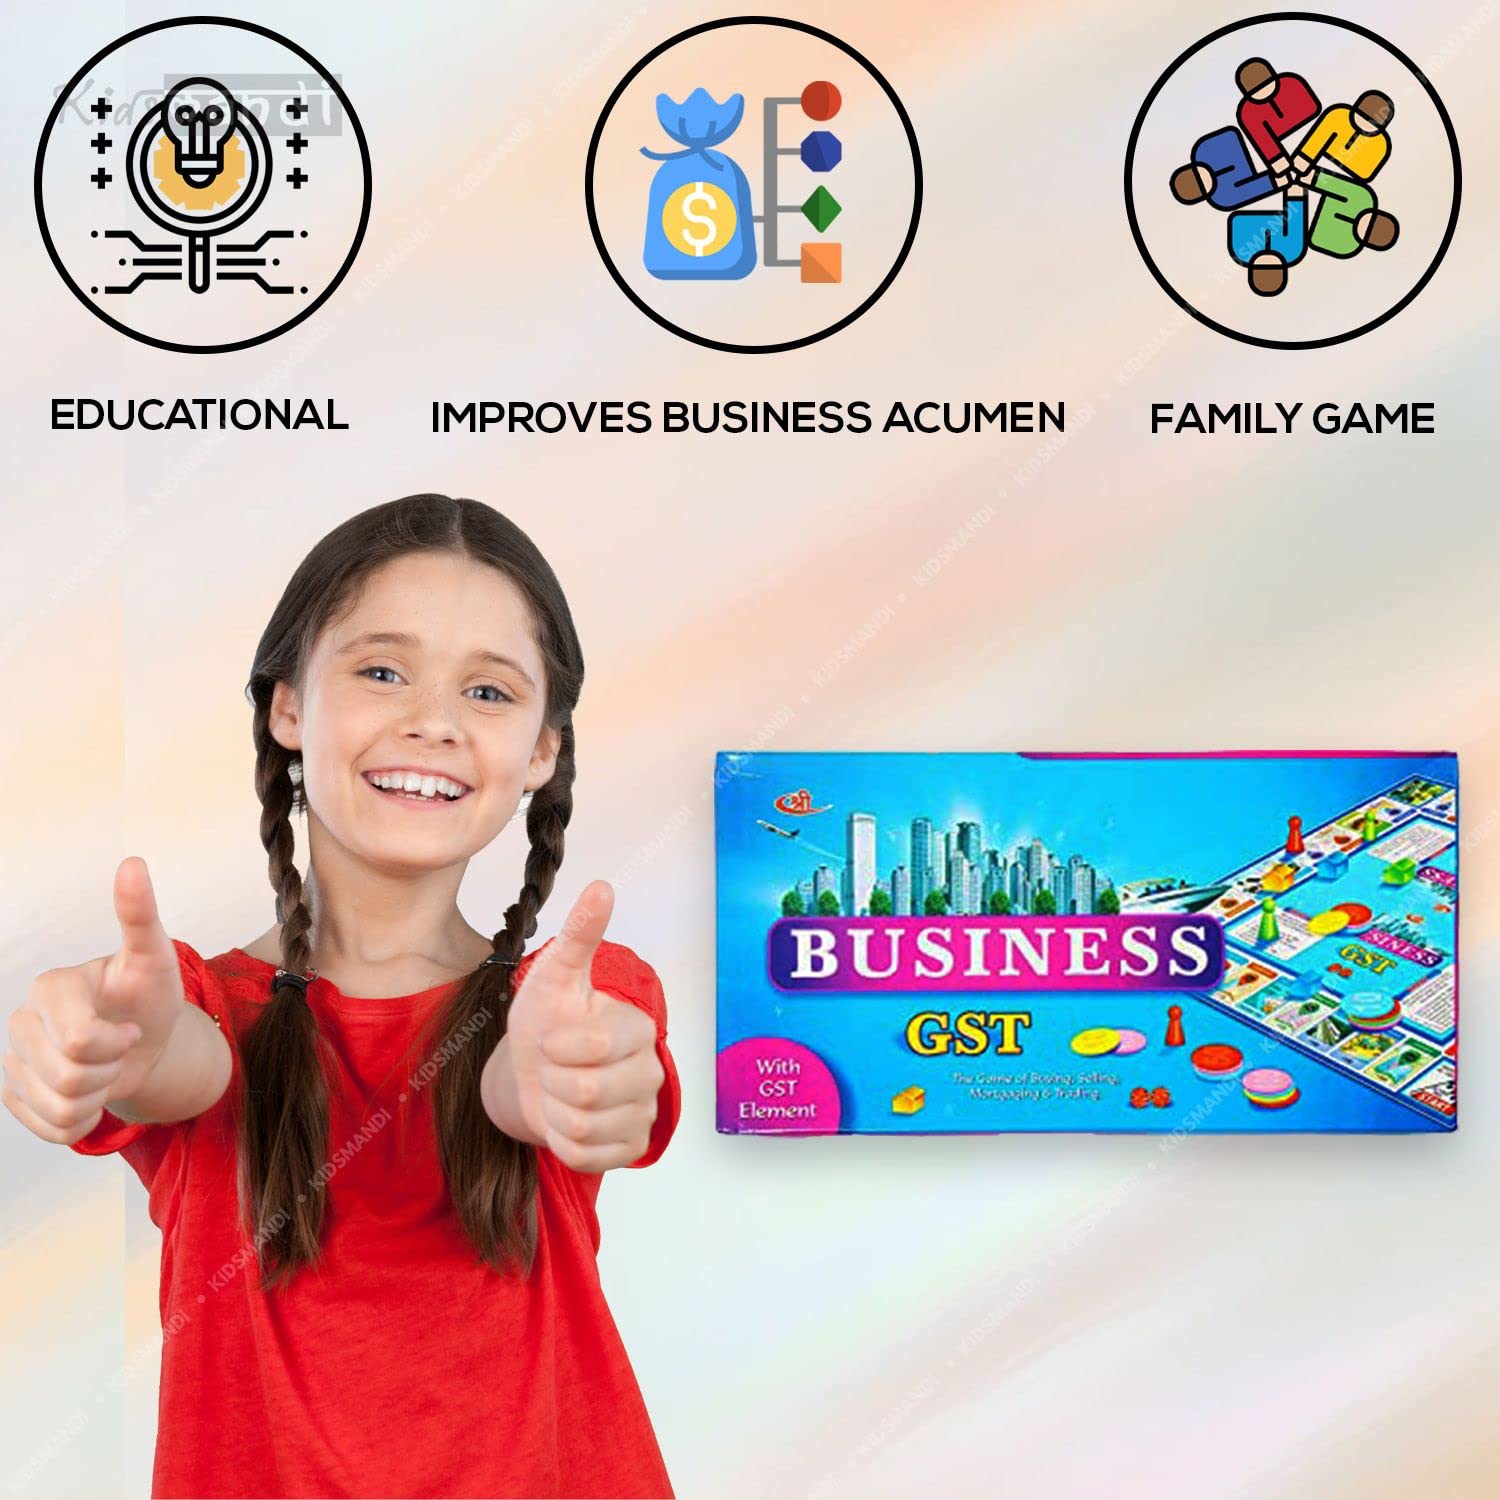 Kids Mandi fun-filled business game with coins for young businessmen.